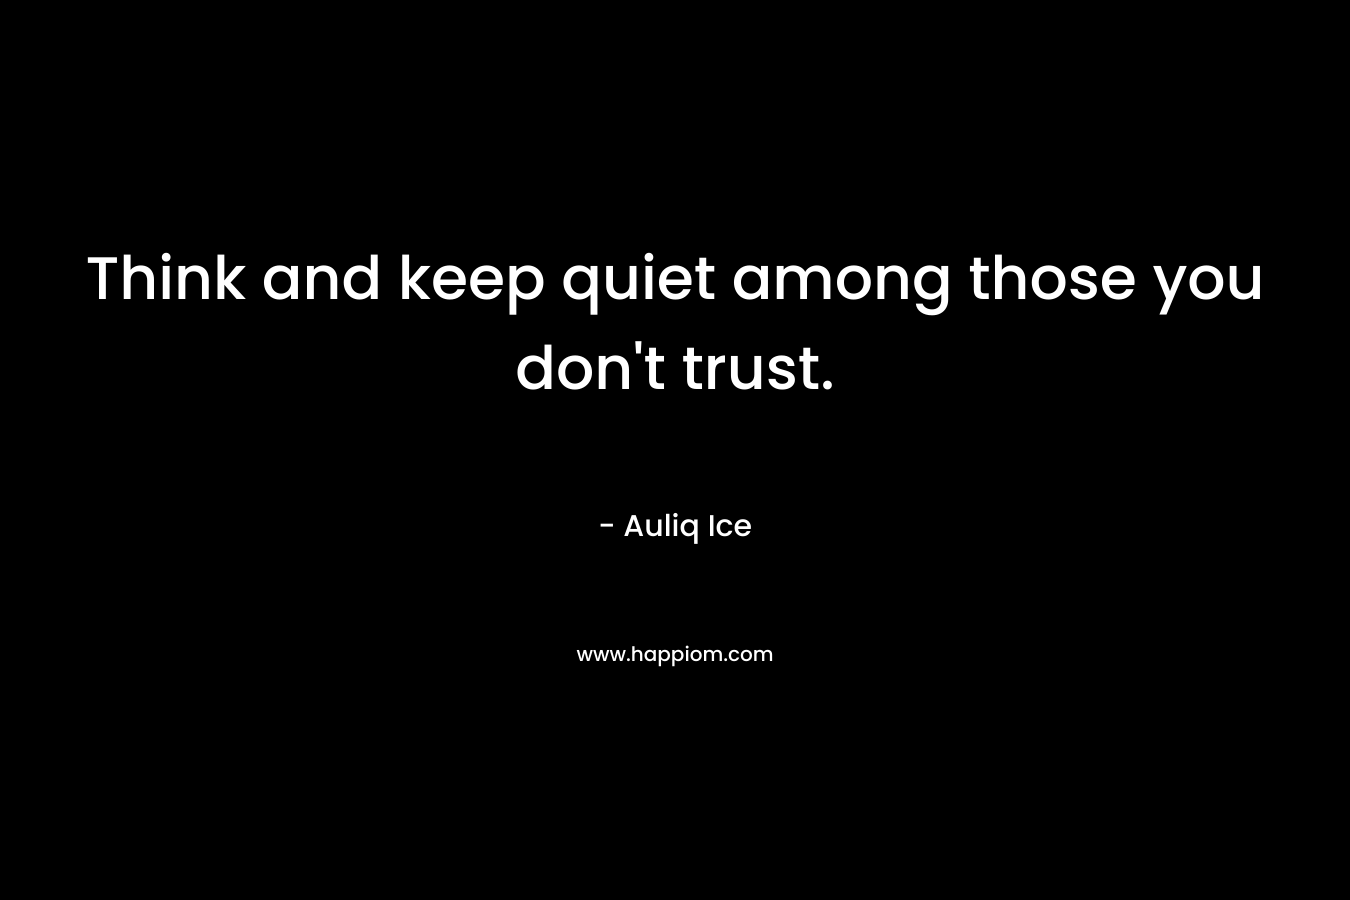 Think and keep quiet among those you don't trust.